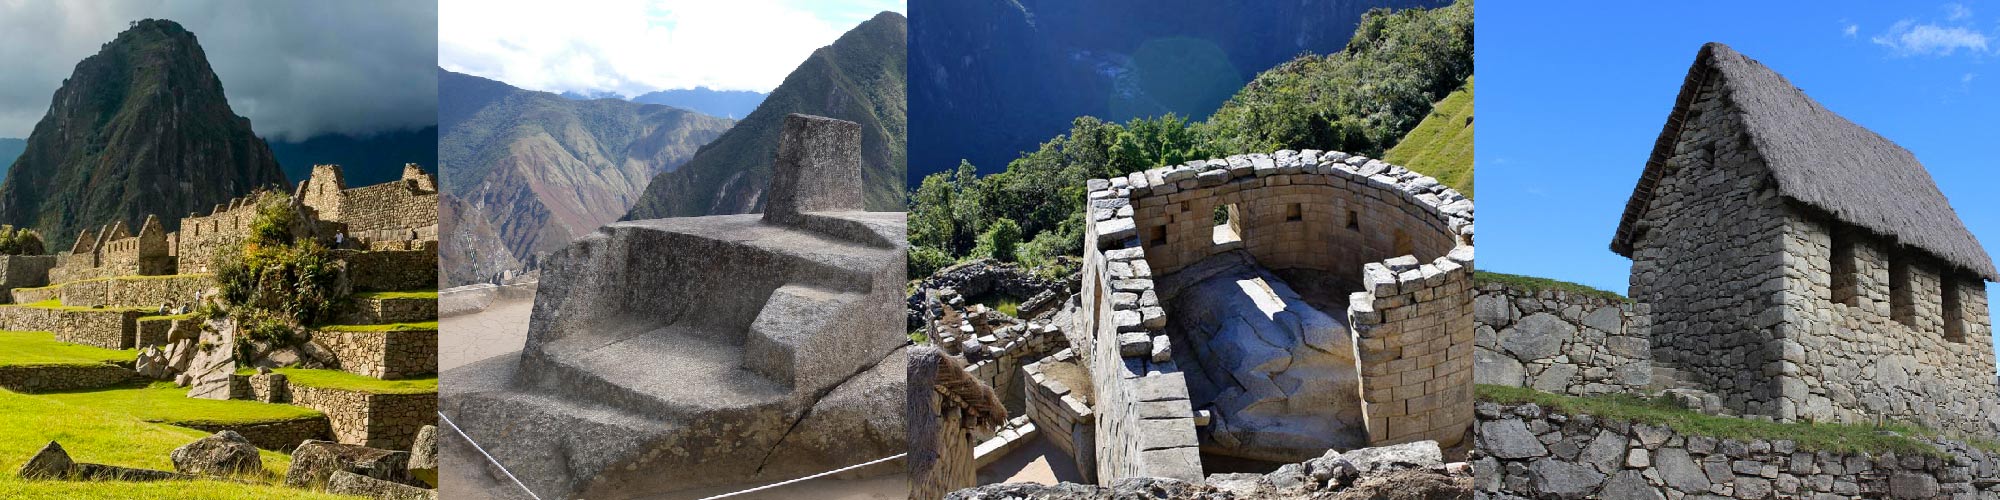 Most important places in Machu Picchu